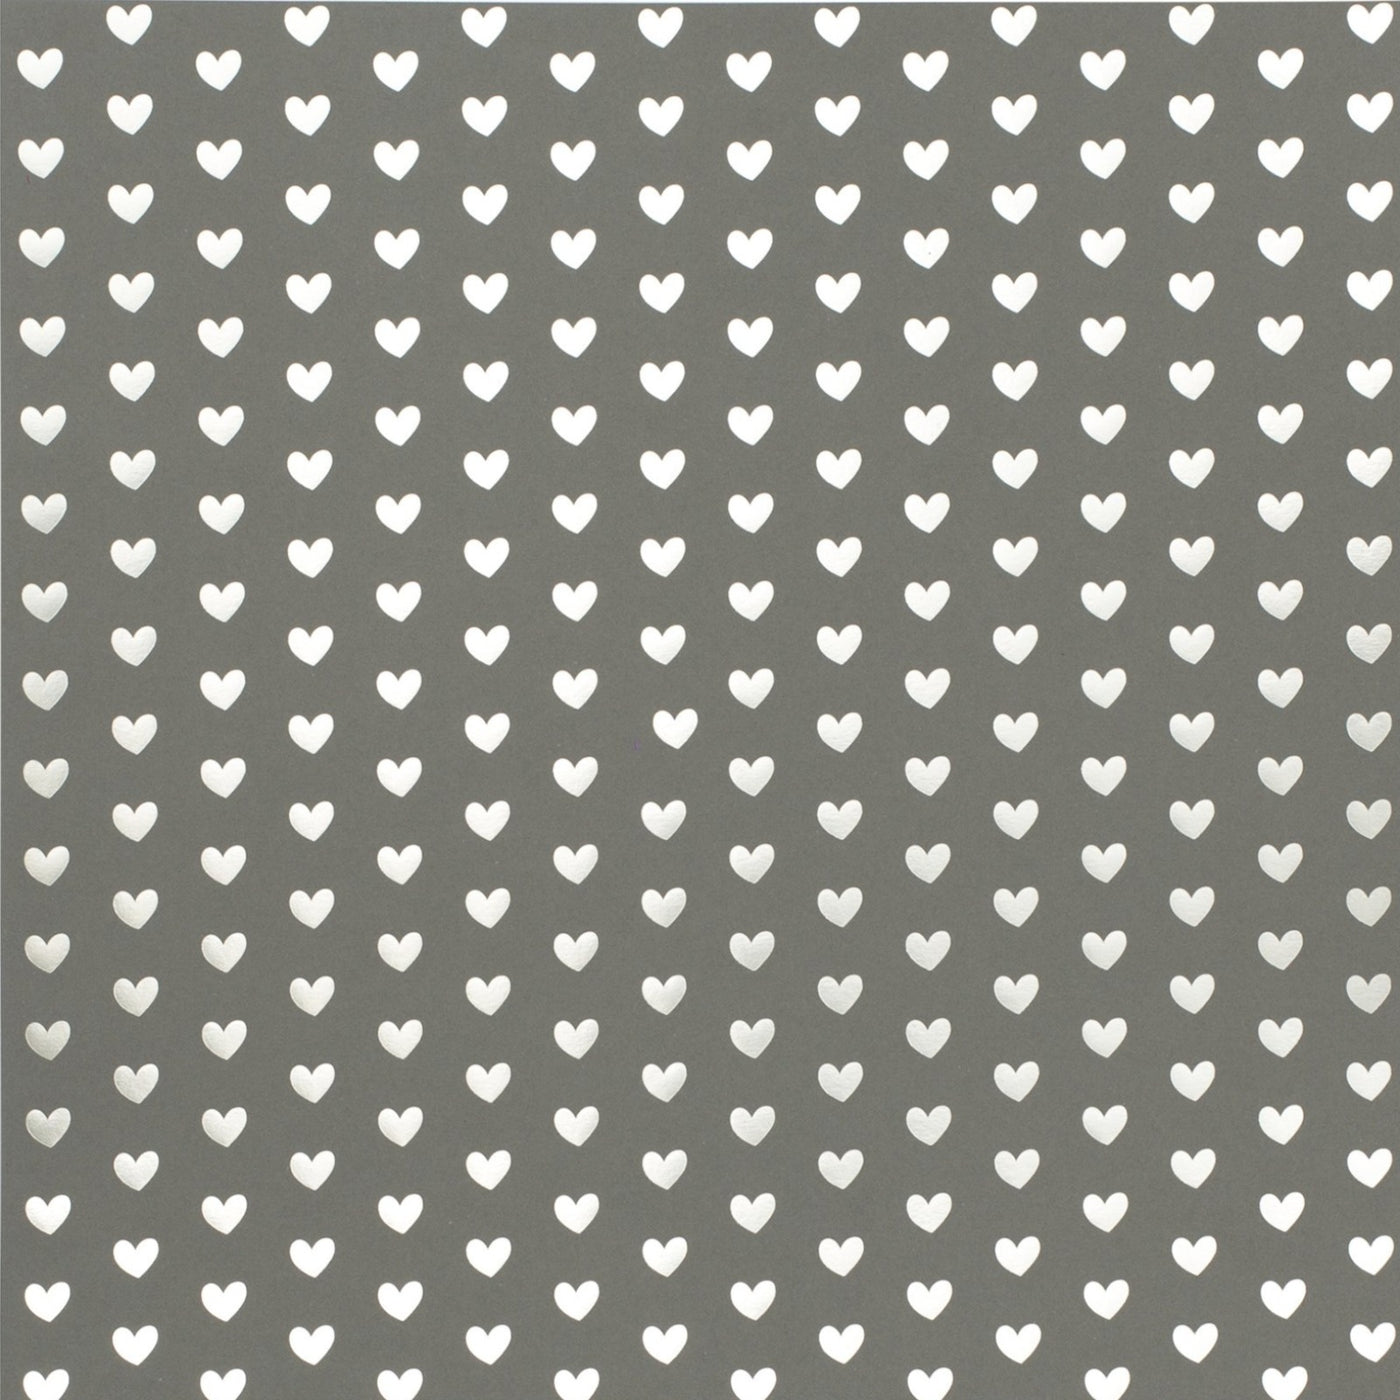 ASH HEART FOIL 12x12 specialty cardstock from American Crafts